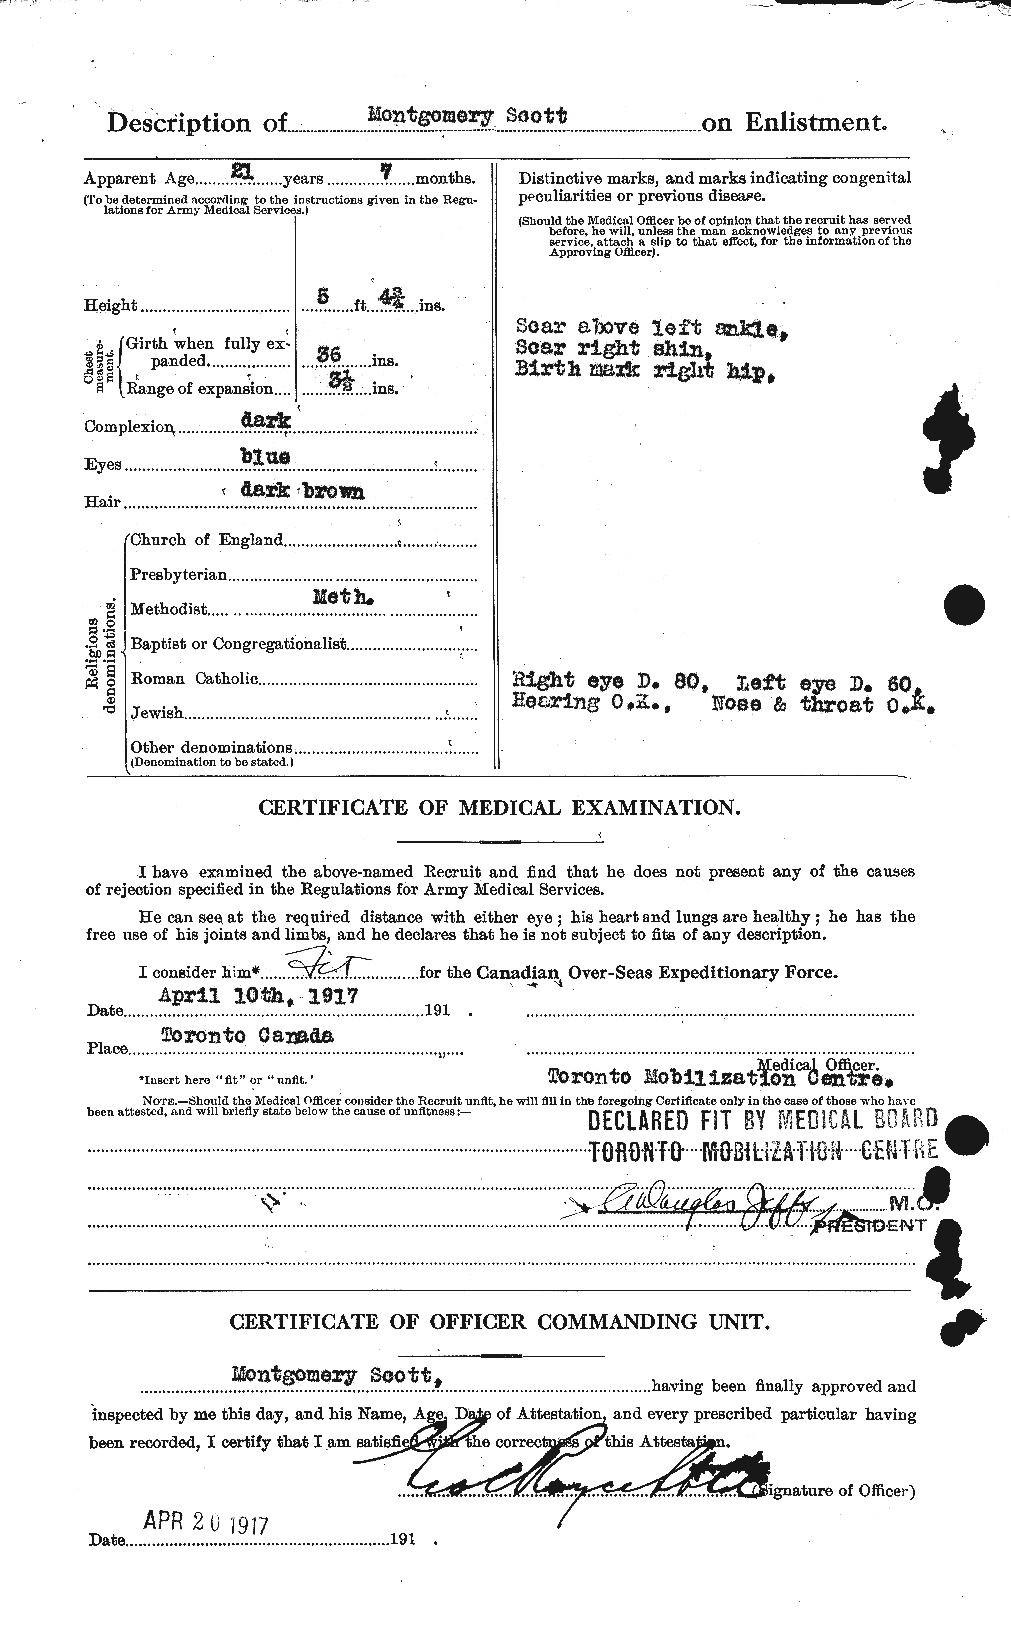 Personnel Records of the First World War - CEF 083489b